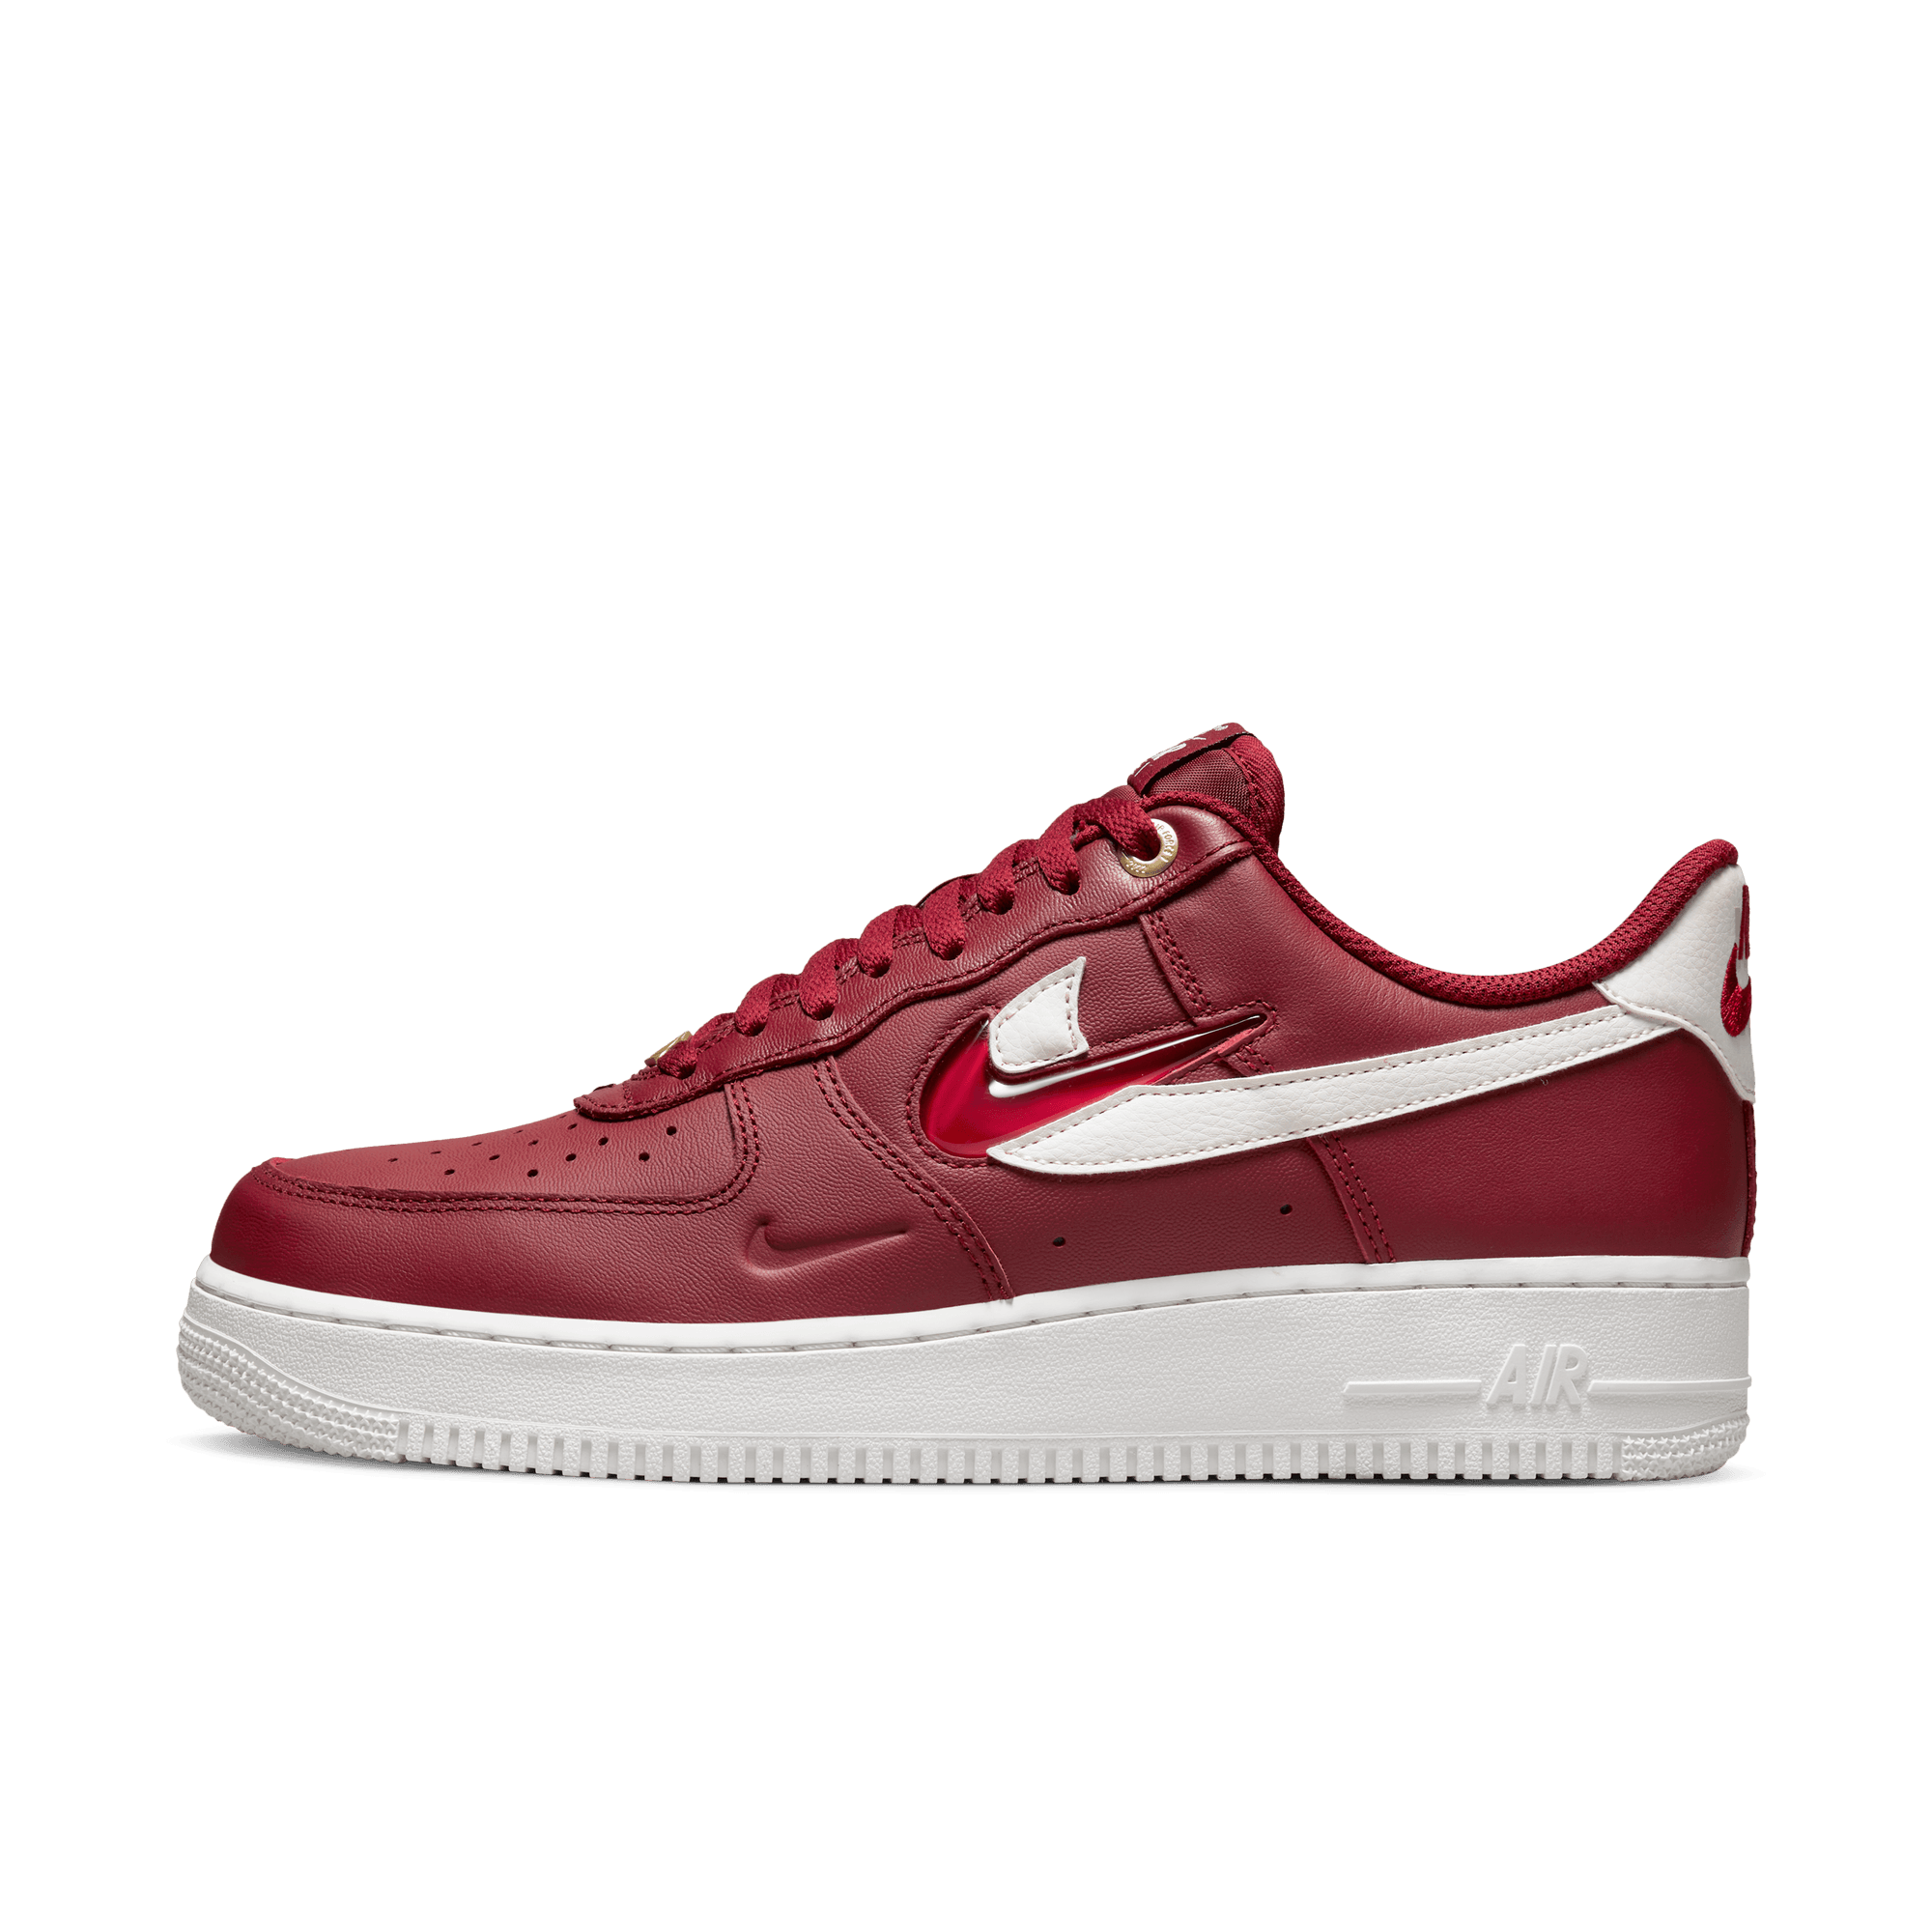 Nike Air Force 1 '07 Premium 'Join Forces Team Red'